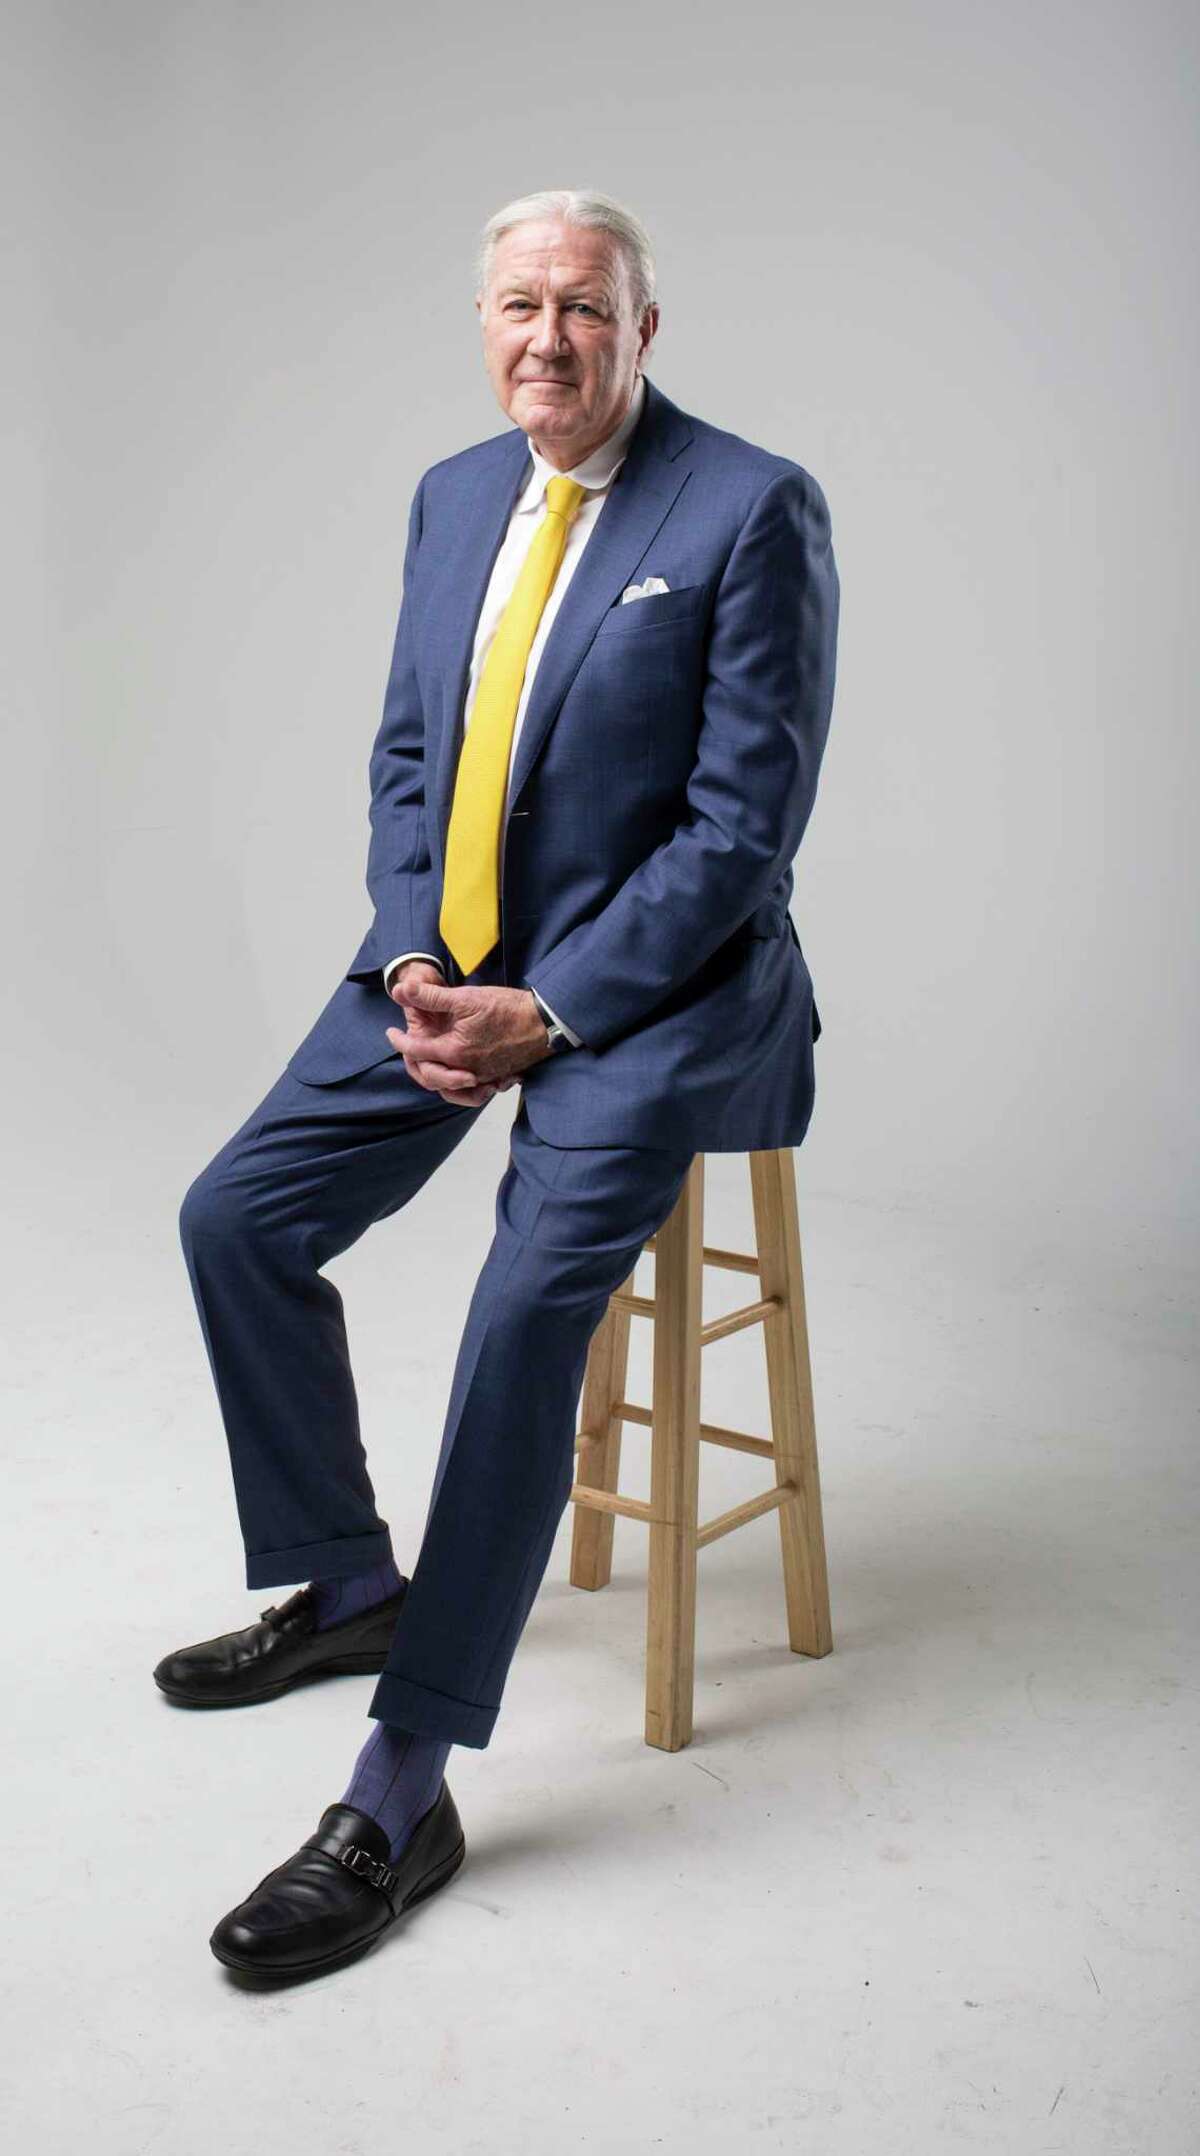 Chuck Carlberg, principal of Richards/Carlberg advertising agency, poses for a portrait in the Houston Chronicle photo studio, Thursday, May 18, 2017, in Houston. ( Jon Shapley / Houston Chronicle )